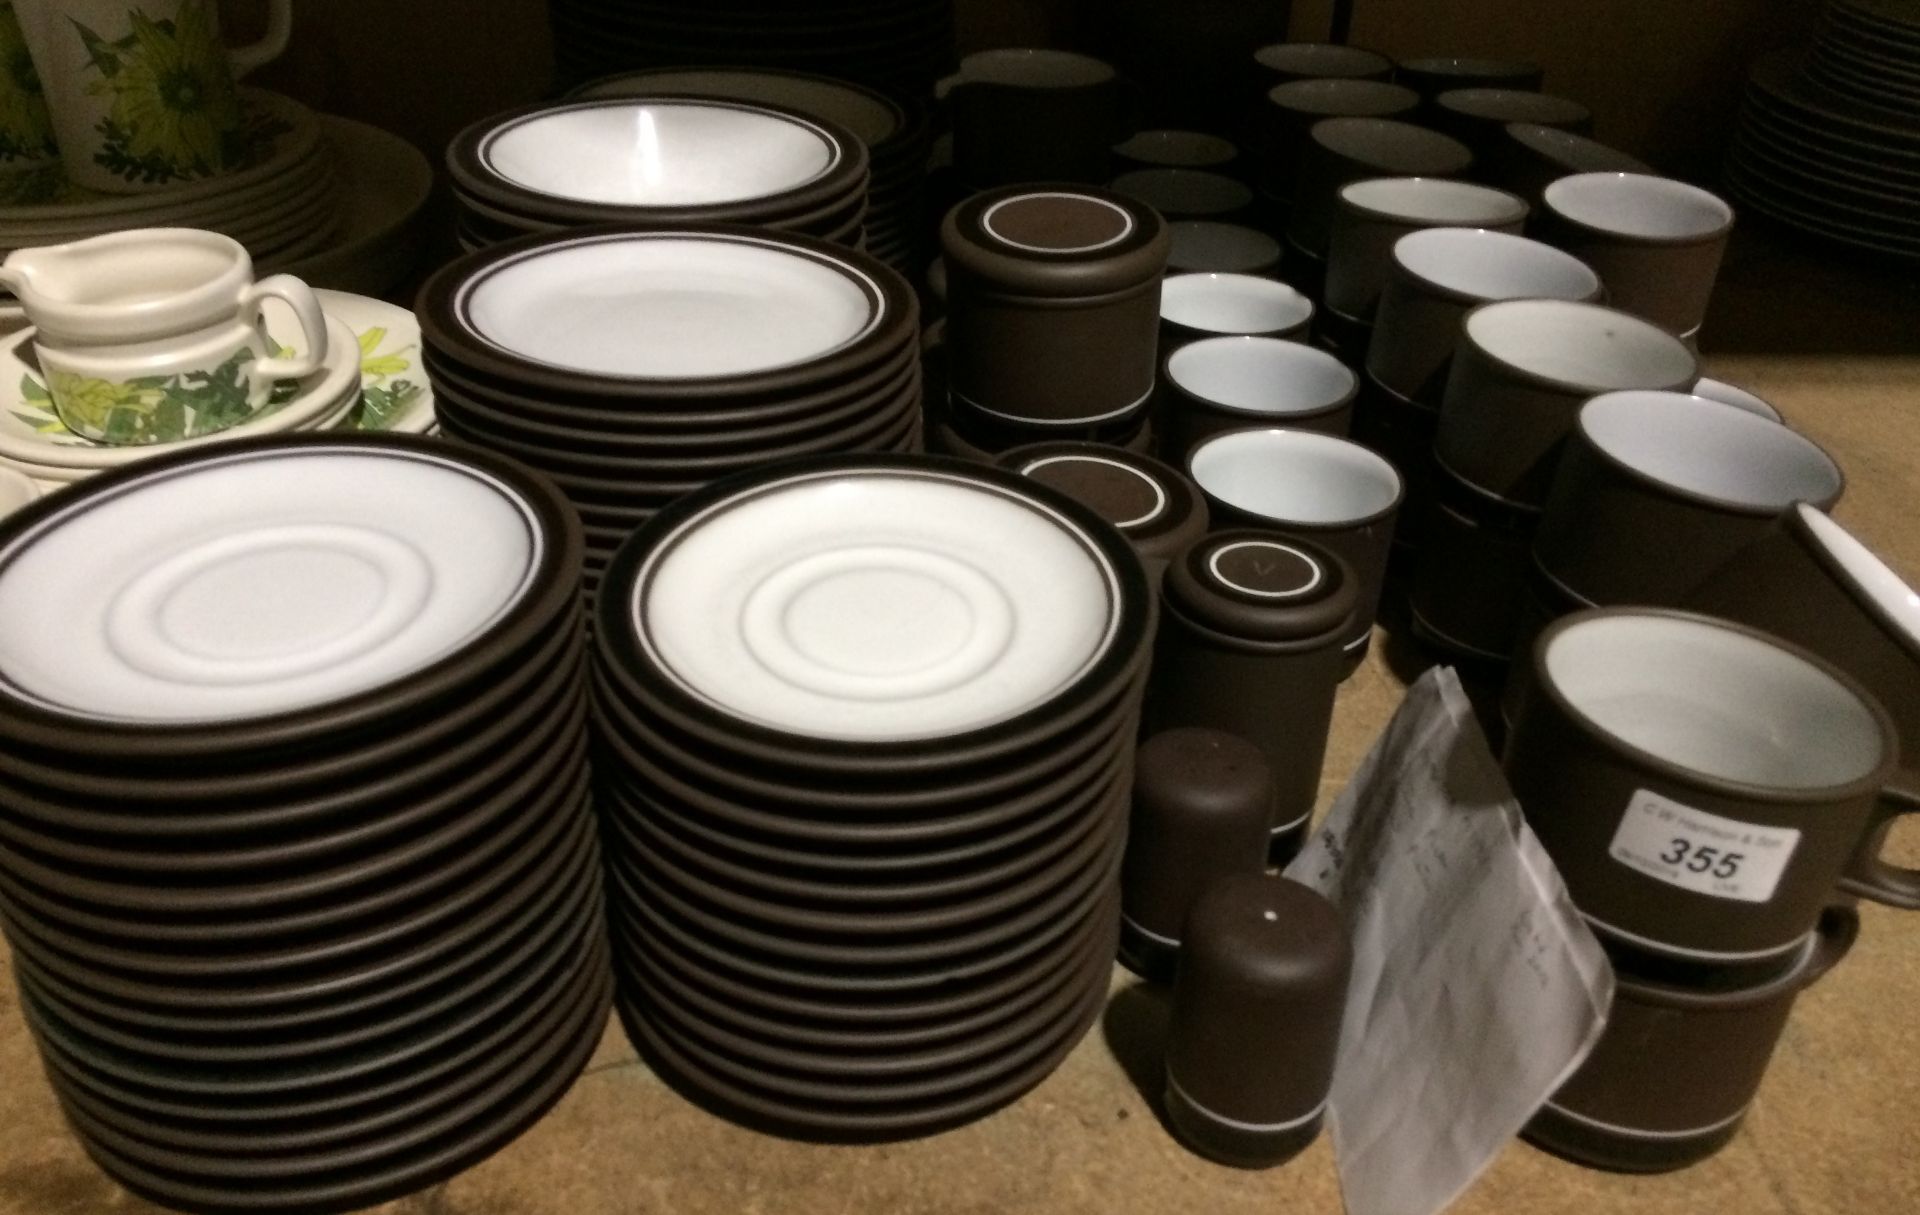 140 x pieces of Hornsea brown and white Contrast tableware - plates, cups, saucers, bowls,